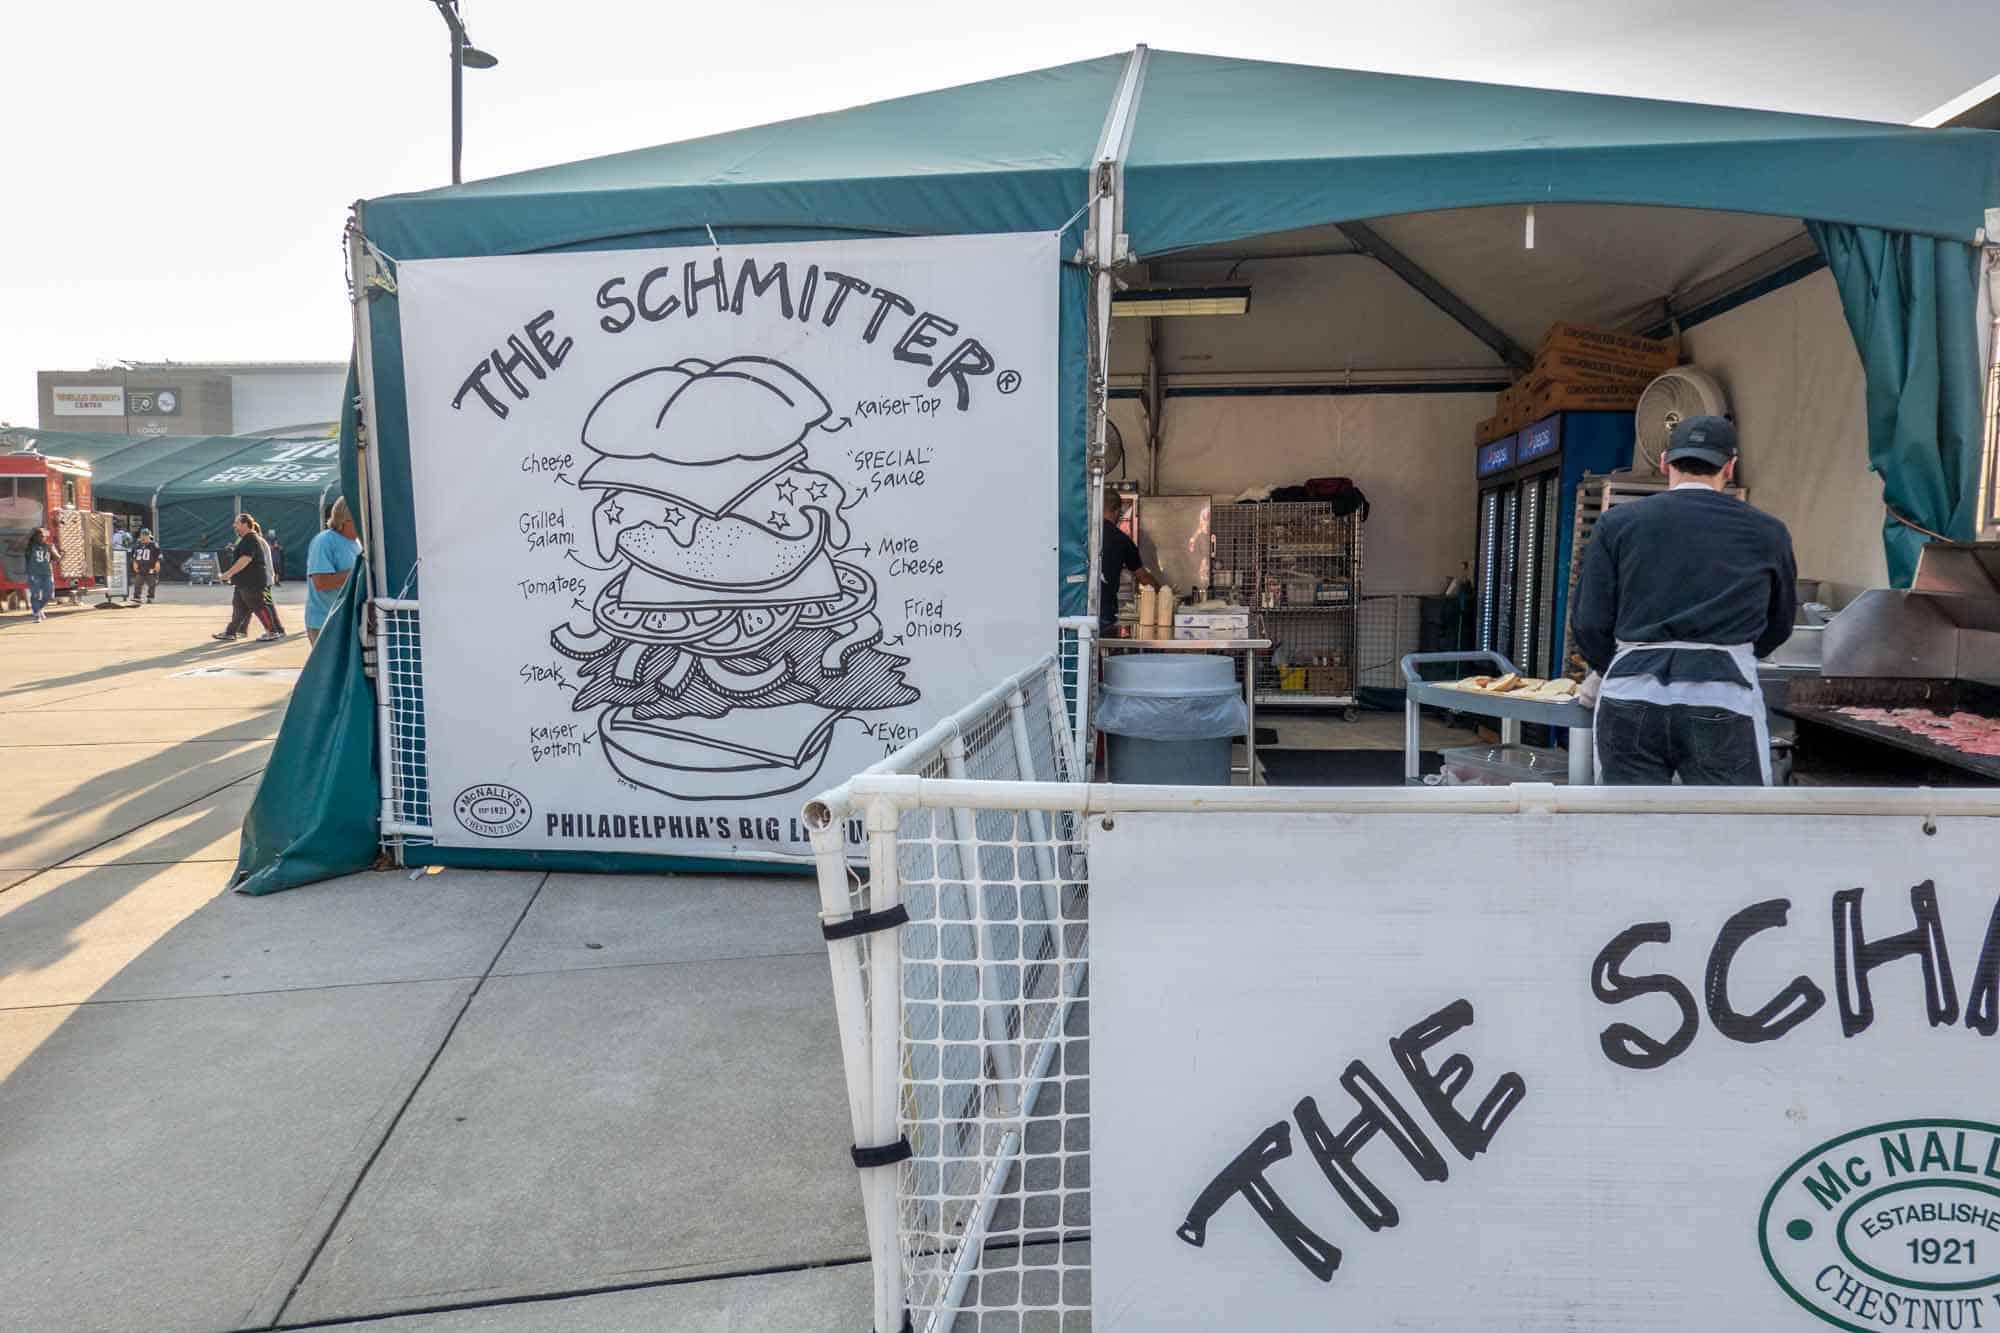 Food tent with sign reading "The Schmitter" and diagram on how to construct with the ingredients